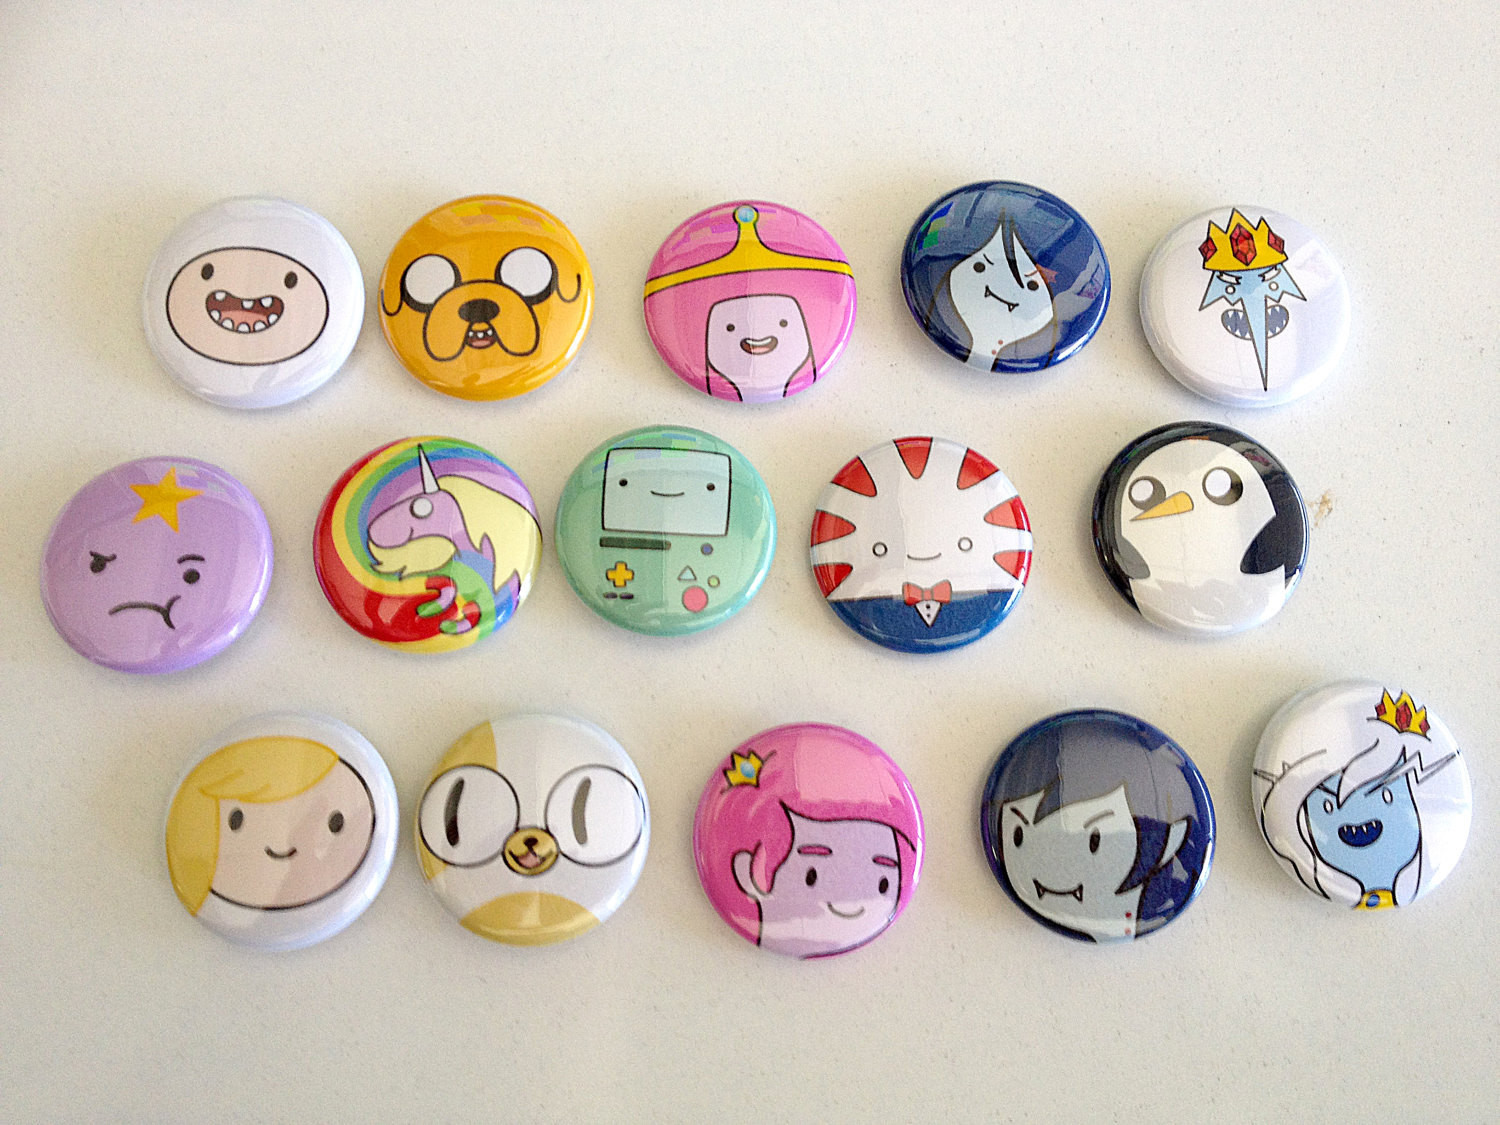 Pins Ideas
 Adventure Time 1 button pin set by Rosewine on Etsy